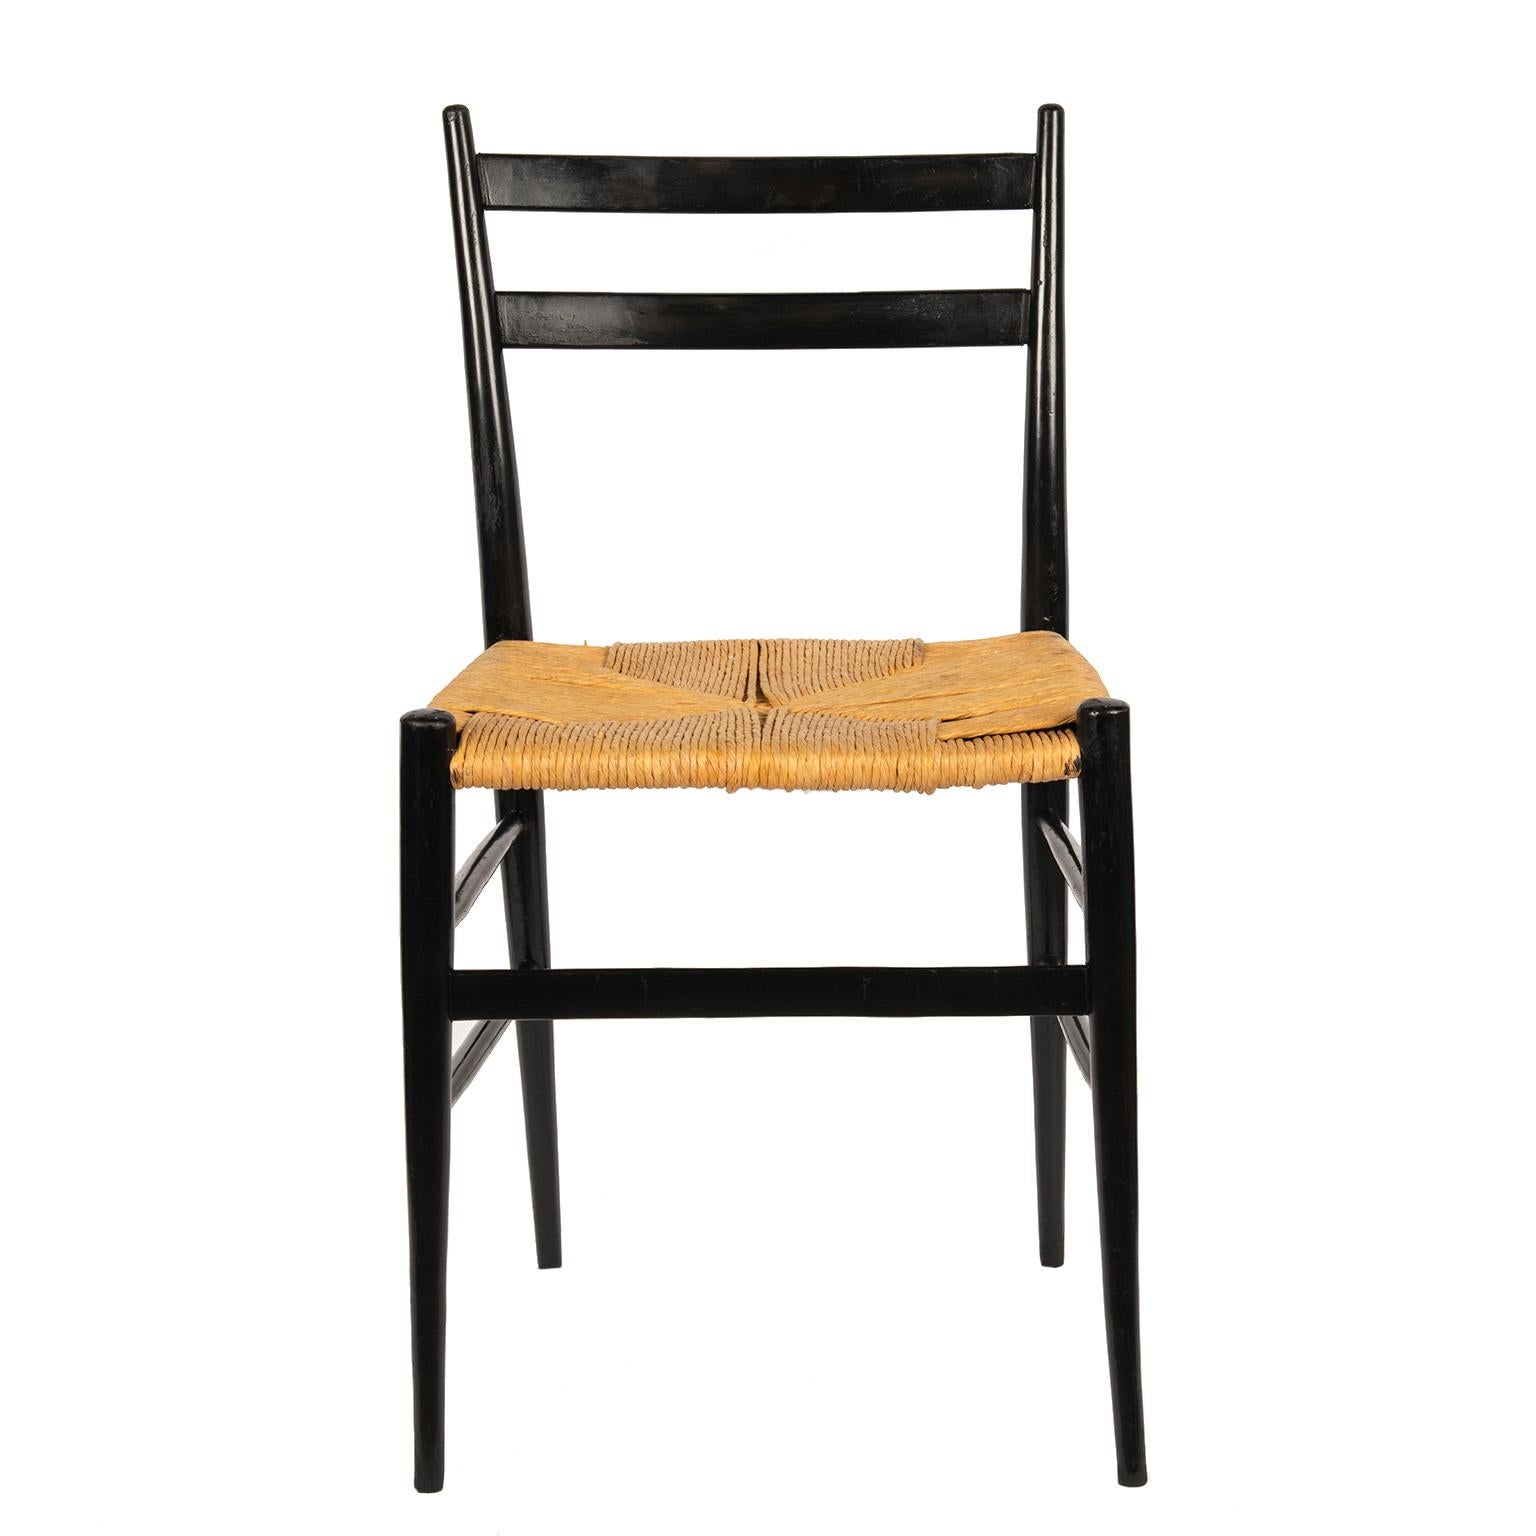 These iconic chairs by Italian design master Gio Ponti are made of black lacquered wood with rush seats.
They are structurally stable and in very good vintage condition. I am offering 6 for sale.